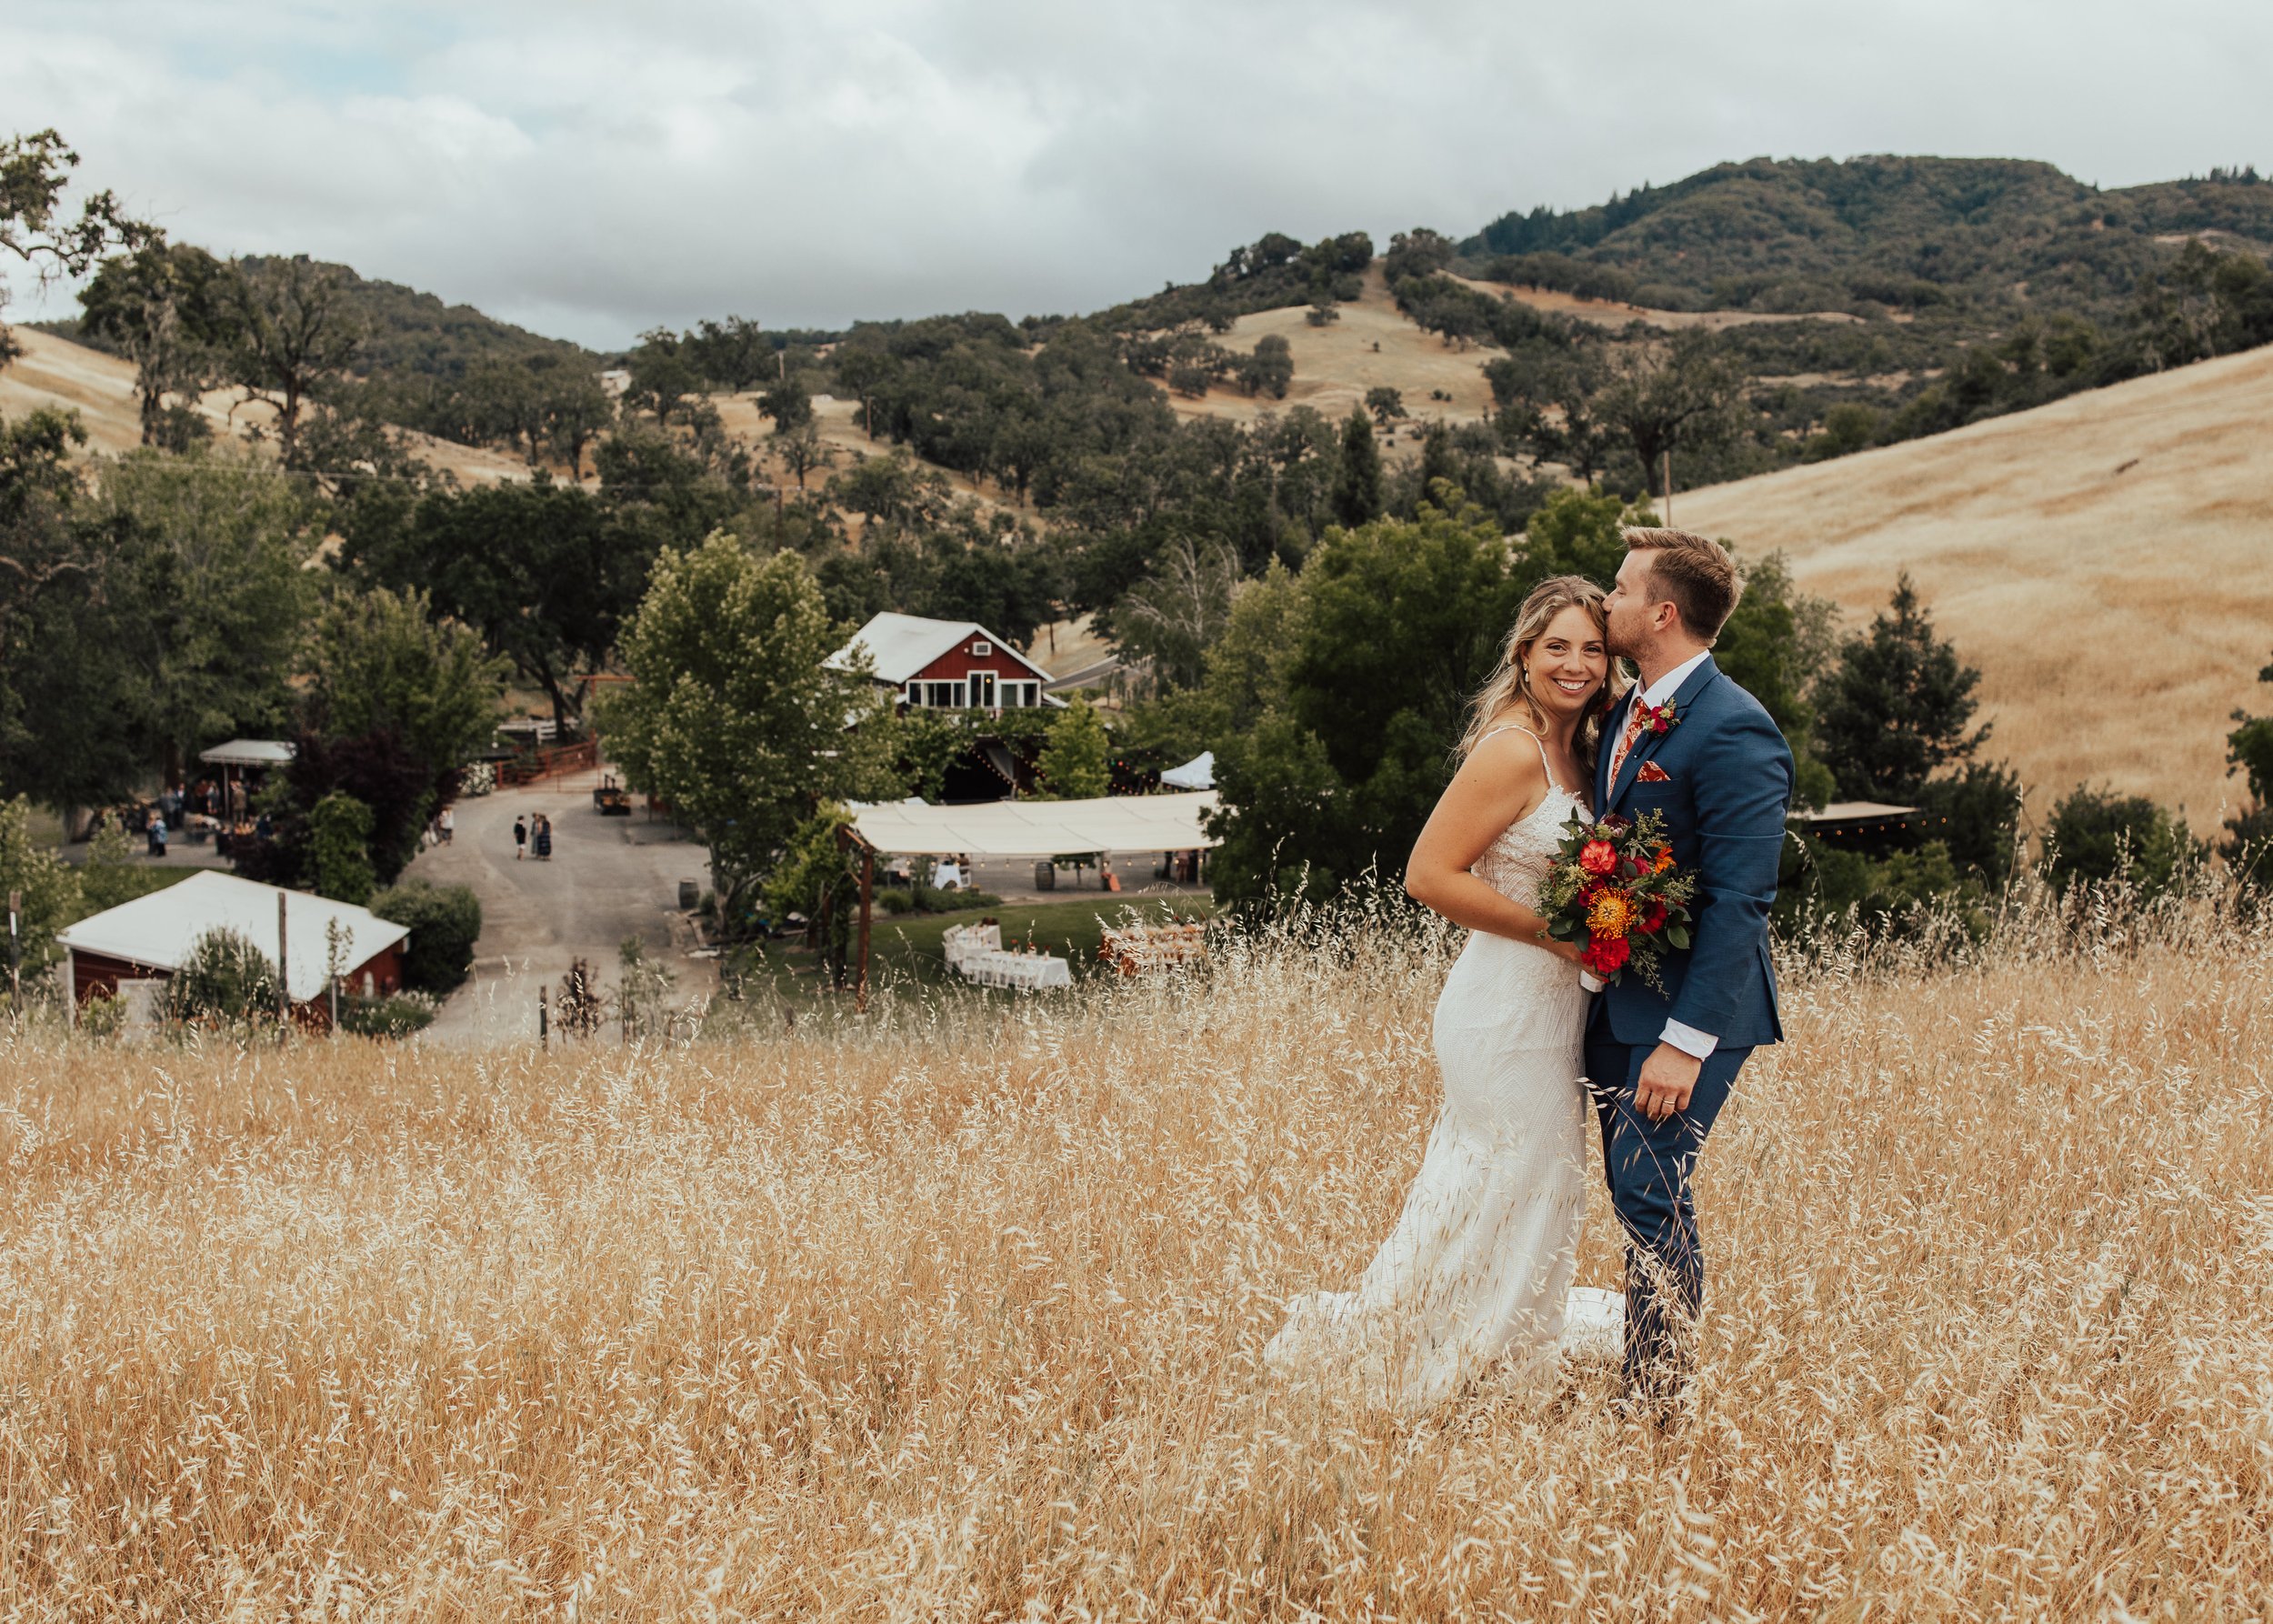 a Colorful wedding at red barn ranch